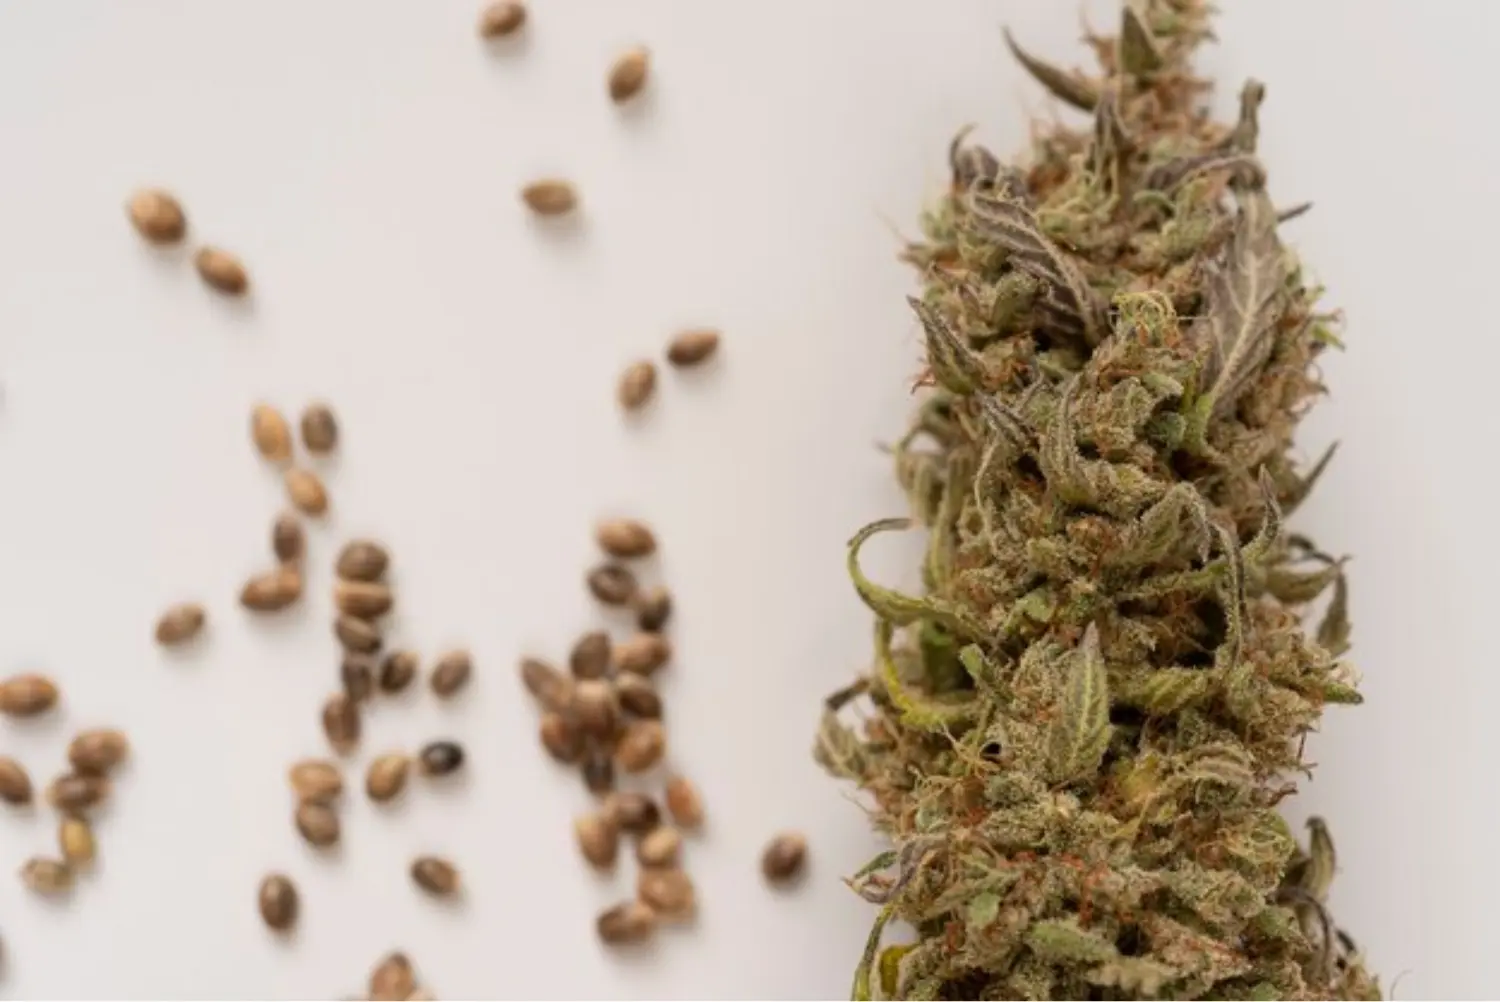 Flower buds and Cannabis seeds